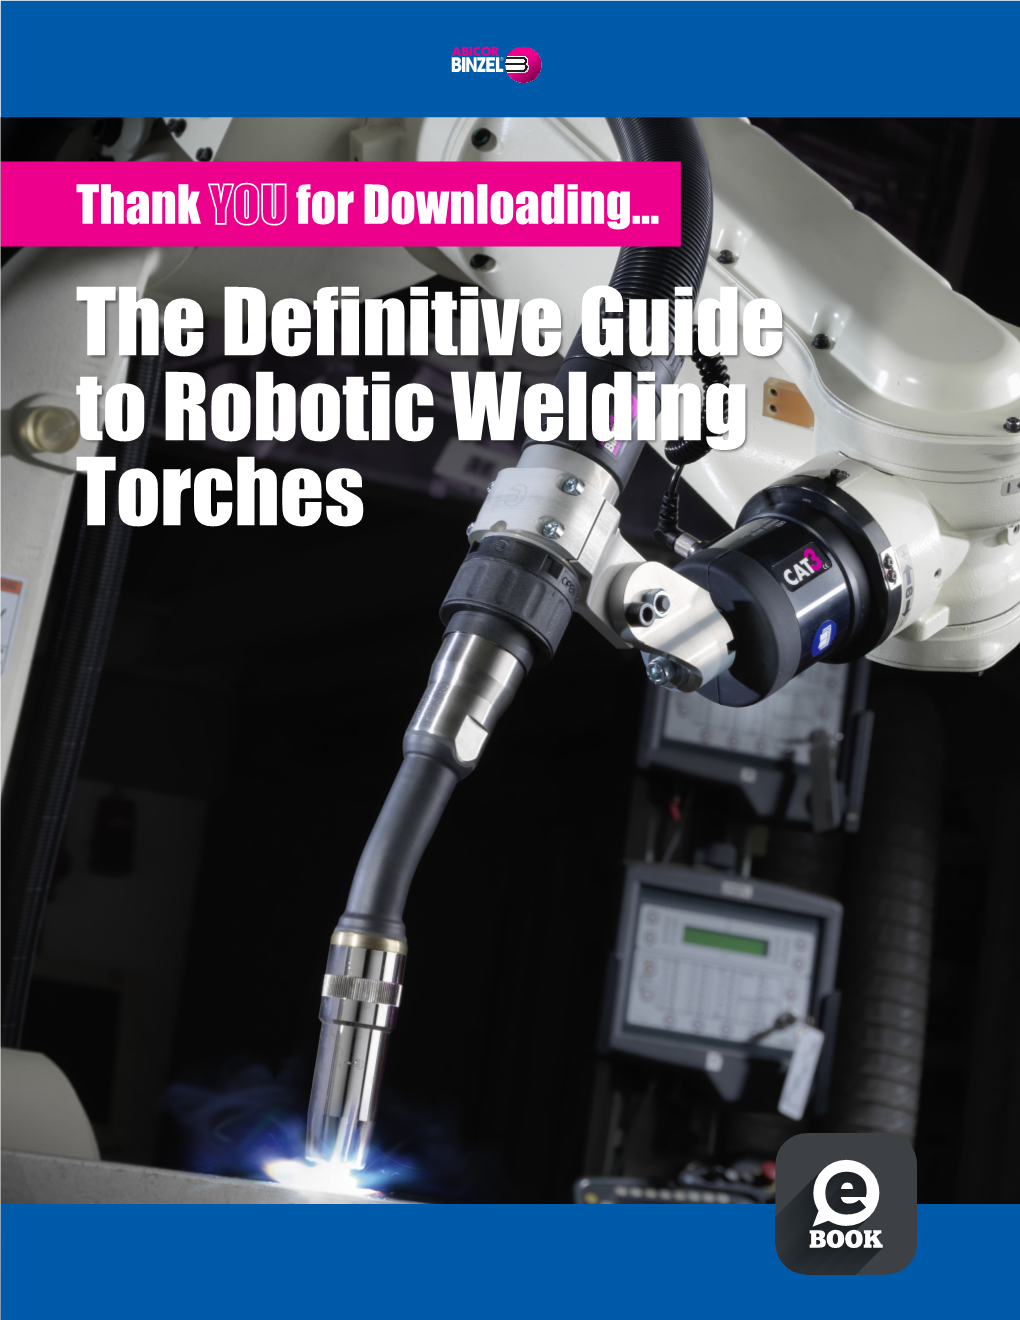 The Definitive Guide to Robotic Welding Torches PAGE 2 | the DEFINITIVE GUIDE to ROBOTIC WELDING TORCHES Content